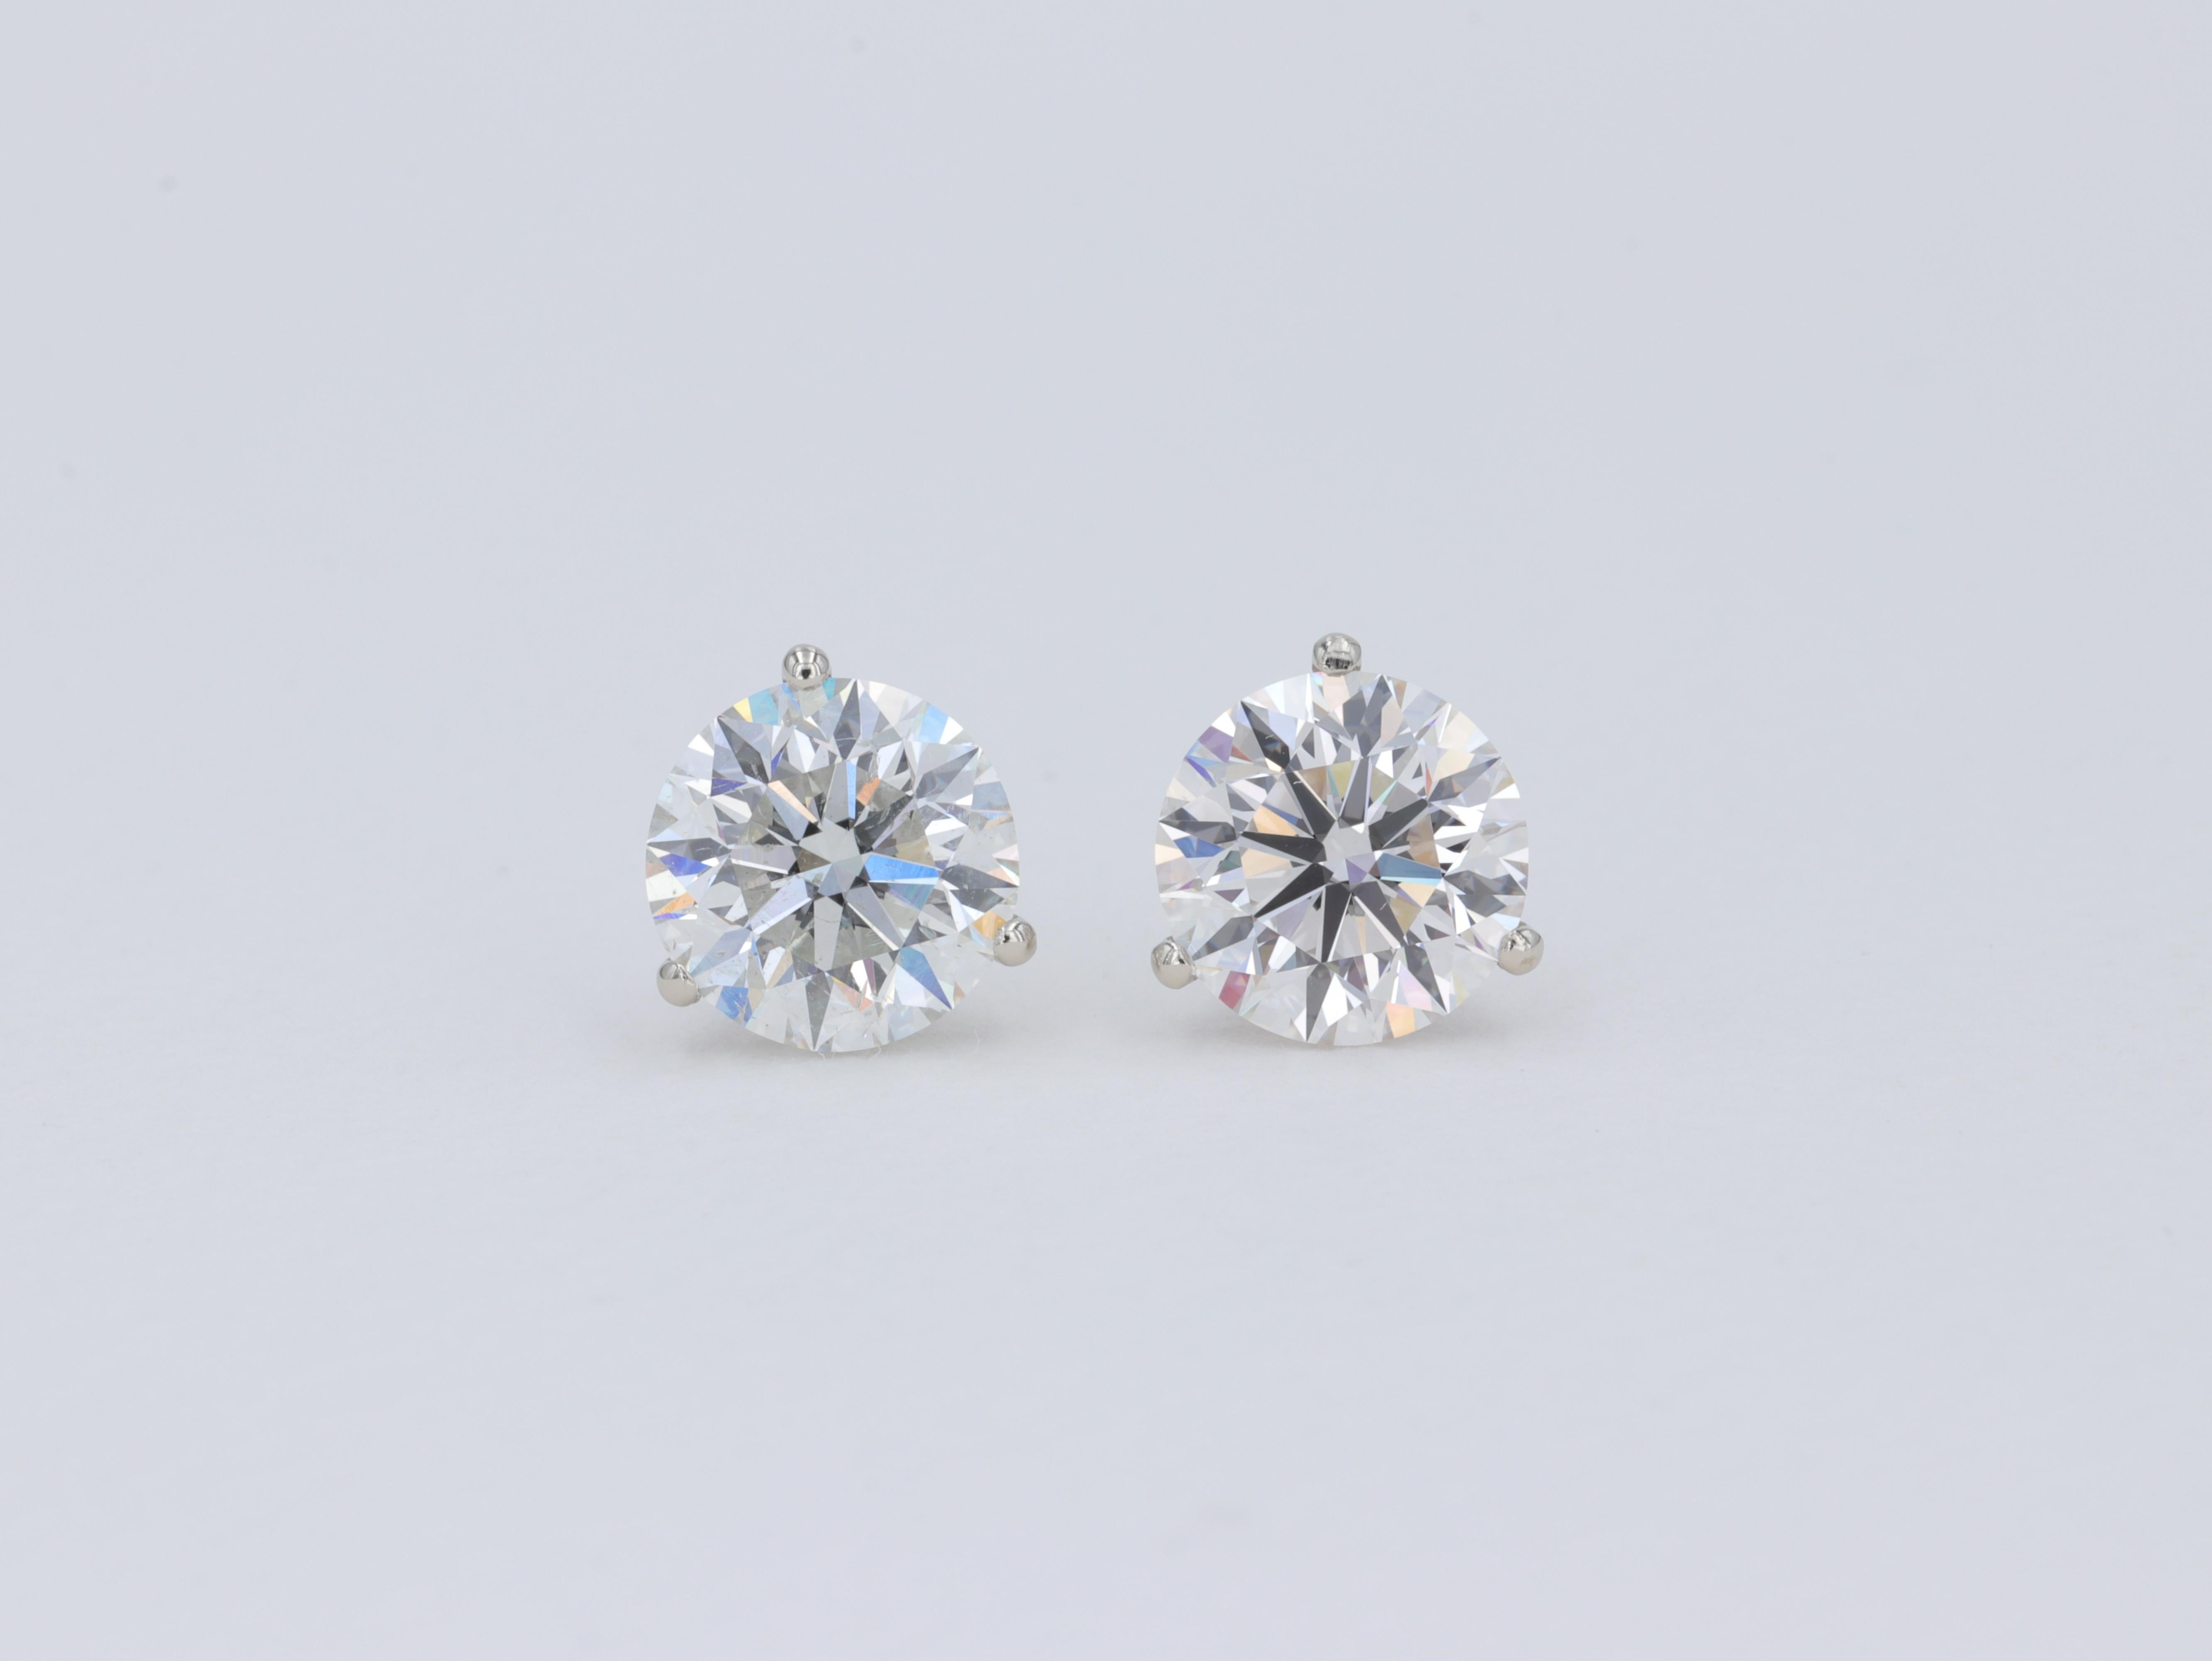 An fine pair of diamond stud earrings featuring a 2.00 carat I color SI1 clarity triple excellent cut round brilliant diamond as graded by the Gemological Institute of America as well as a 2.02 carat H color SI2 clarity triple excellent cut round